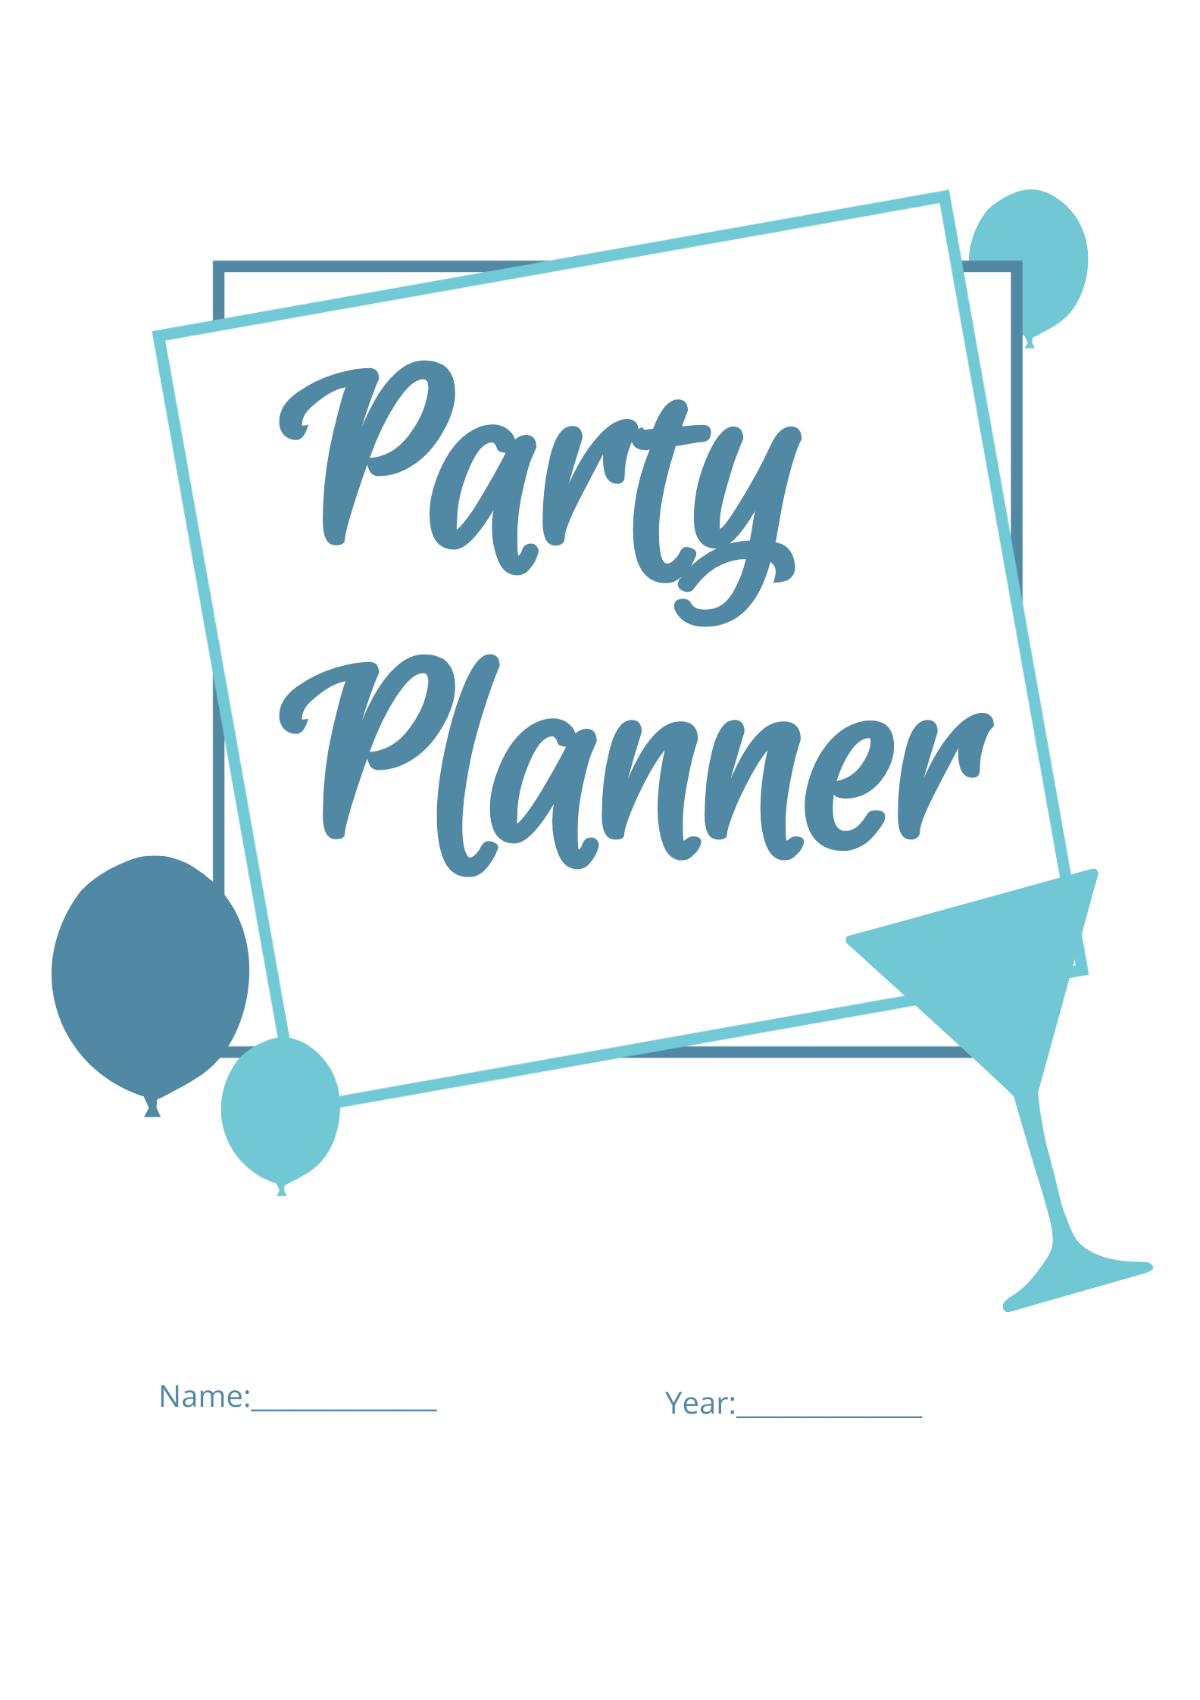 Blank Event Planner Template